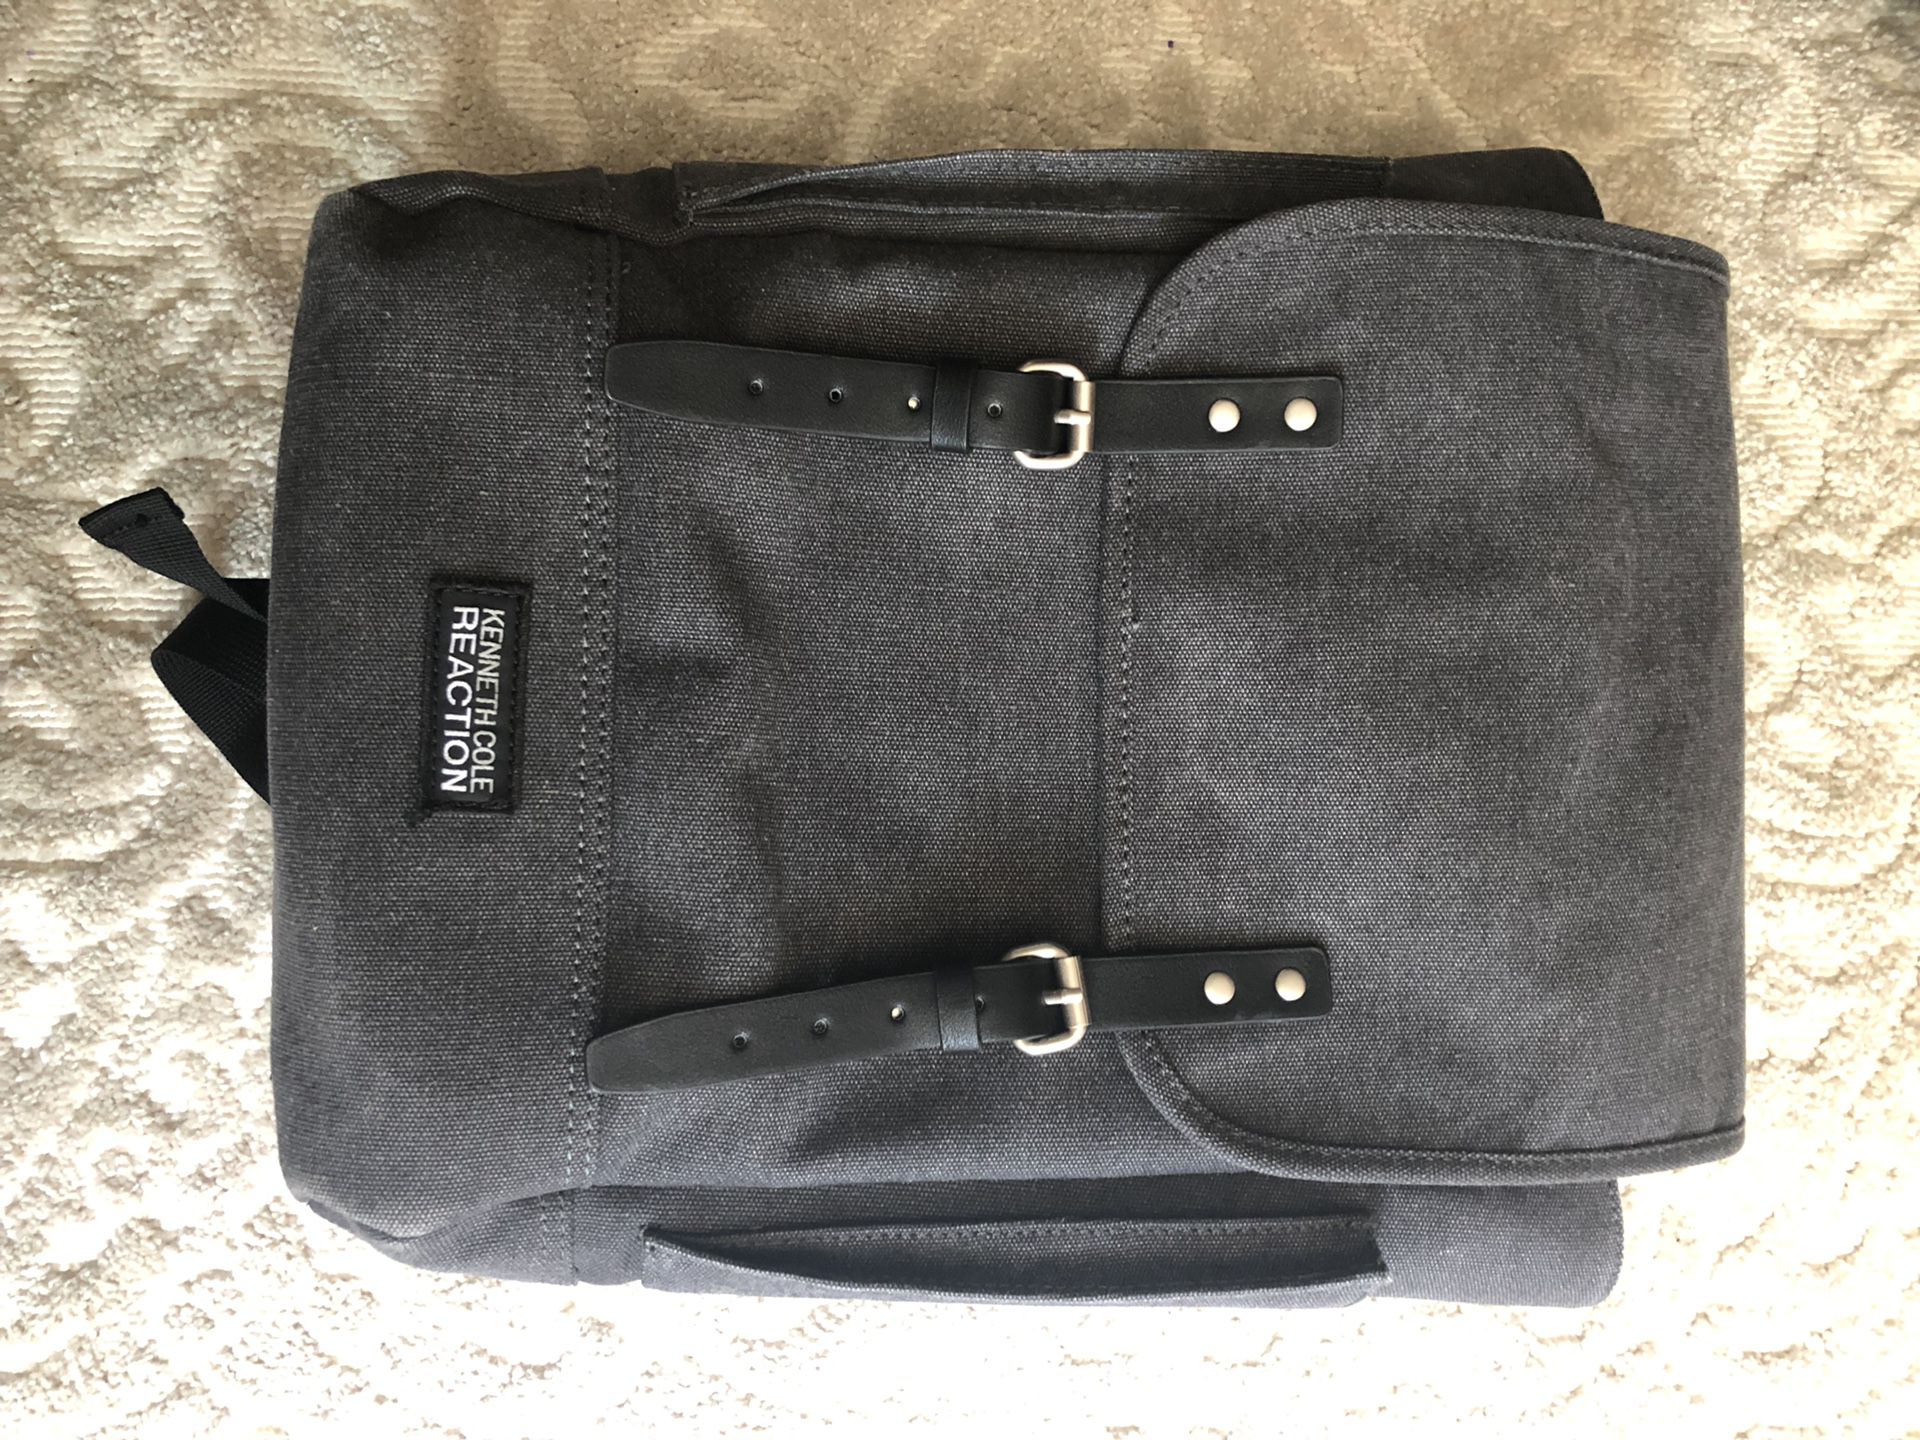 Kenneth Cole Reaction Backpack- Charcoal gray